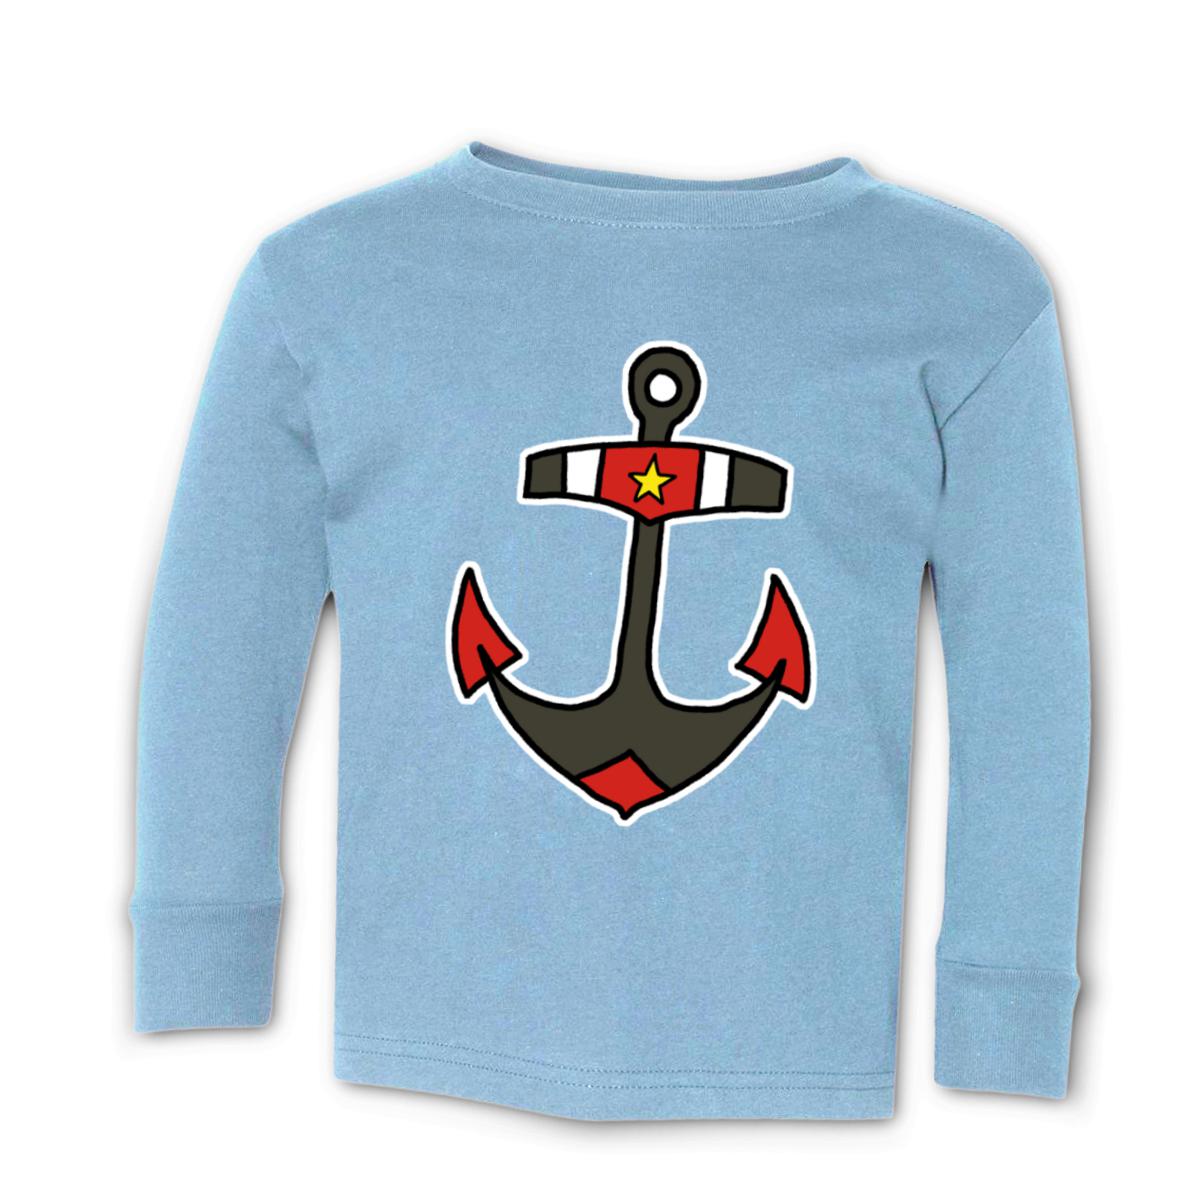 American Traditional Anchor Toddler Long Sleeve Tee 2T light-blue